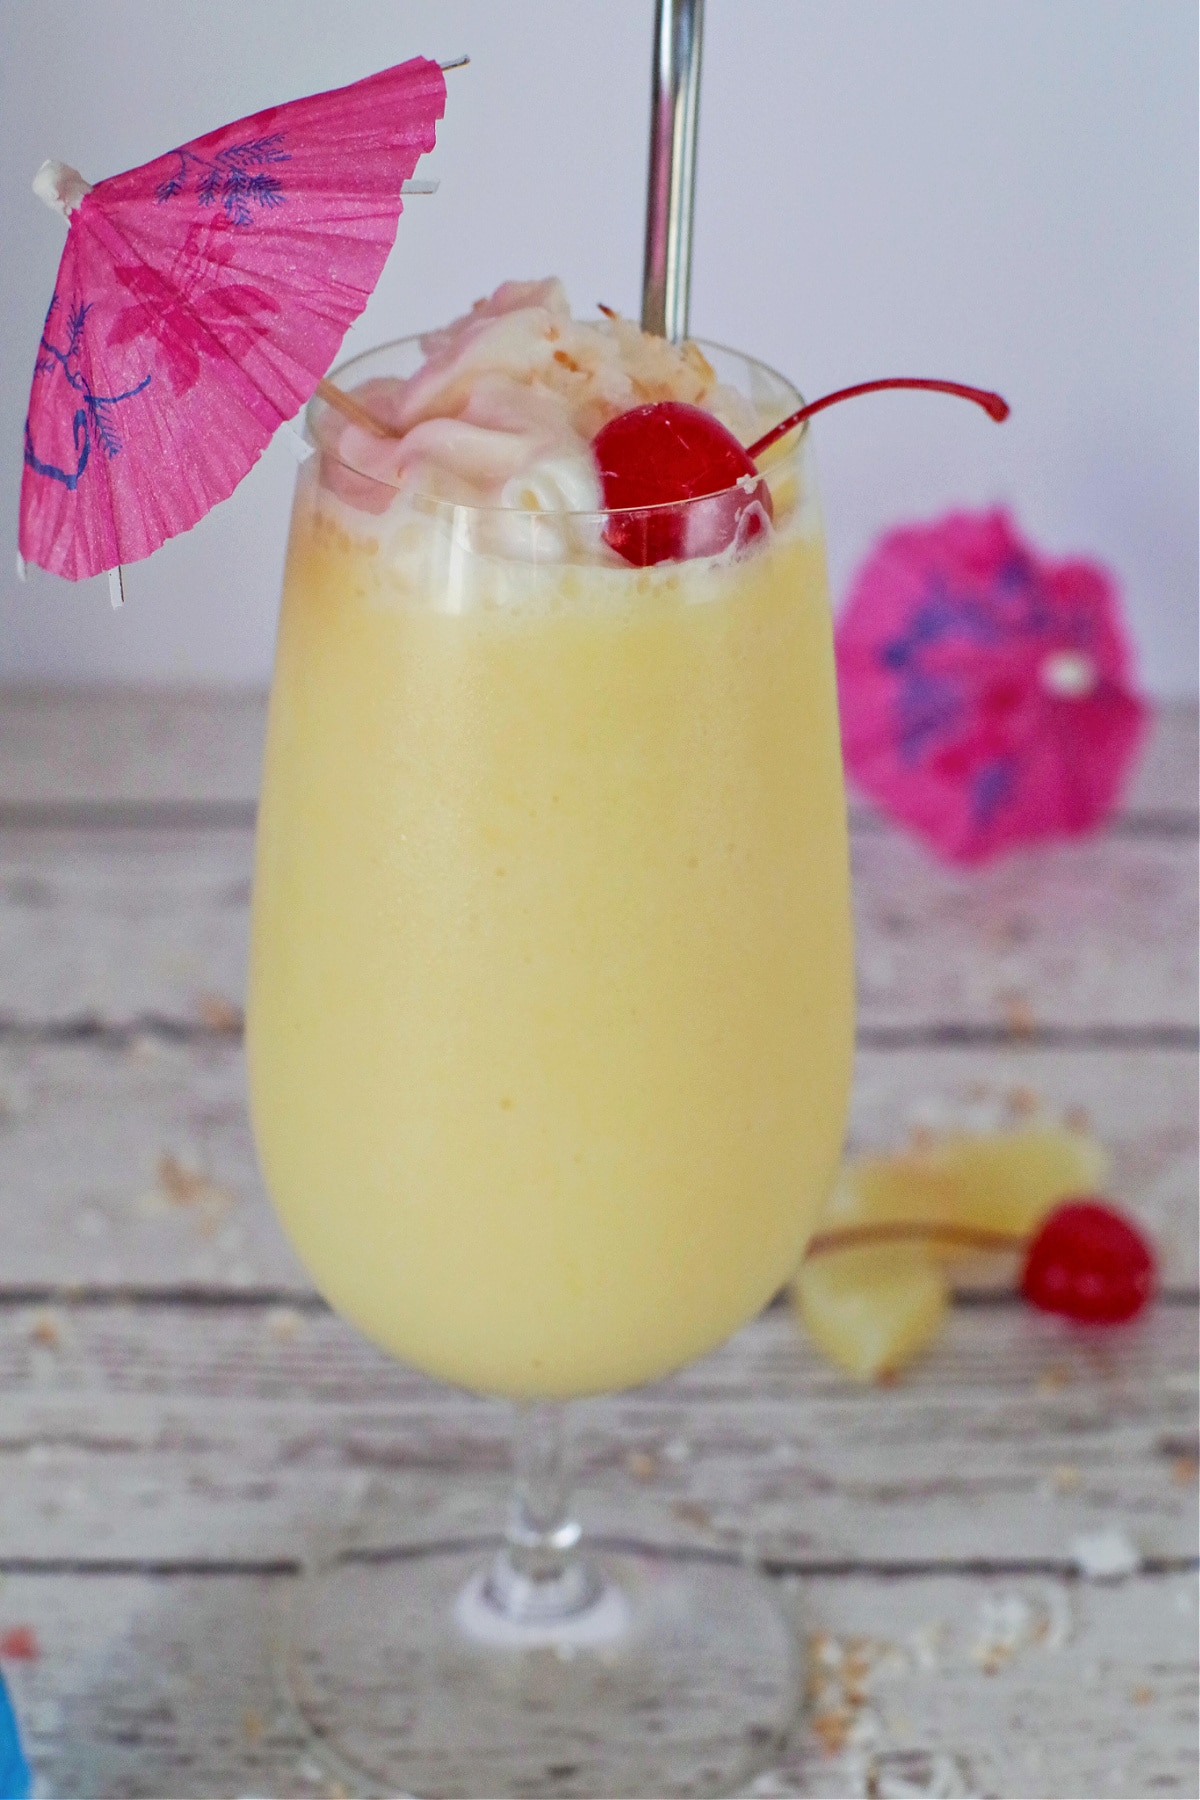  healthy pina colada drink on a white faux wood surface, with pineapple, maraschino cherries and umbrellas